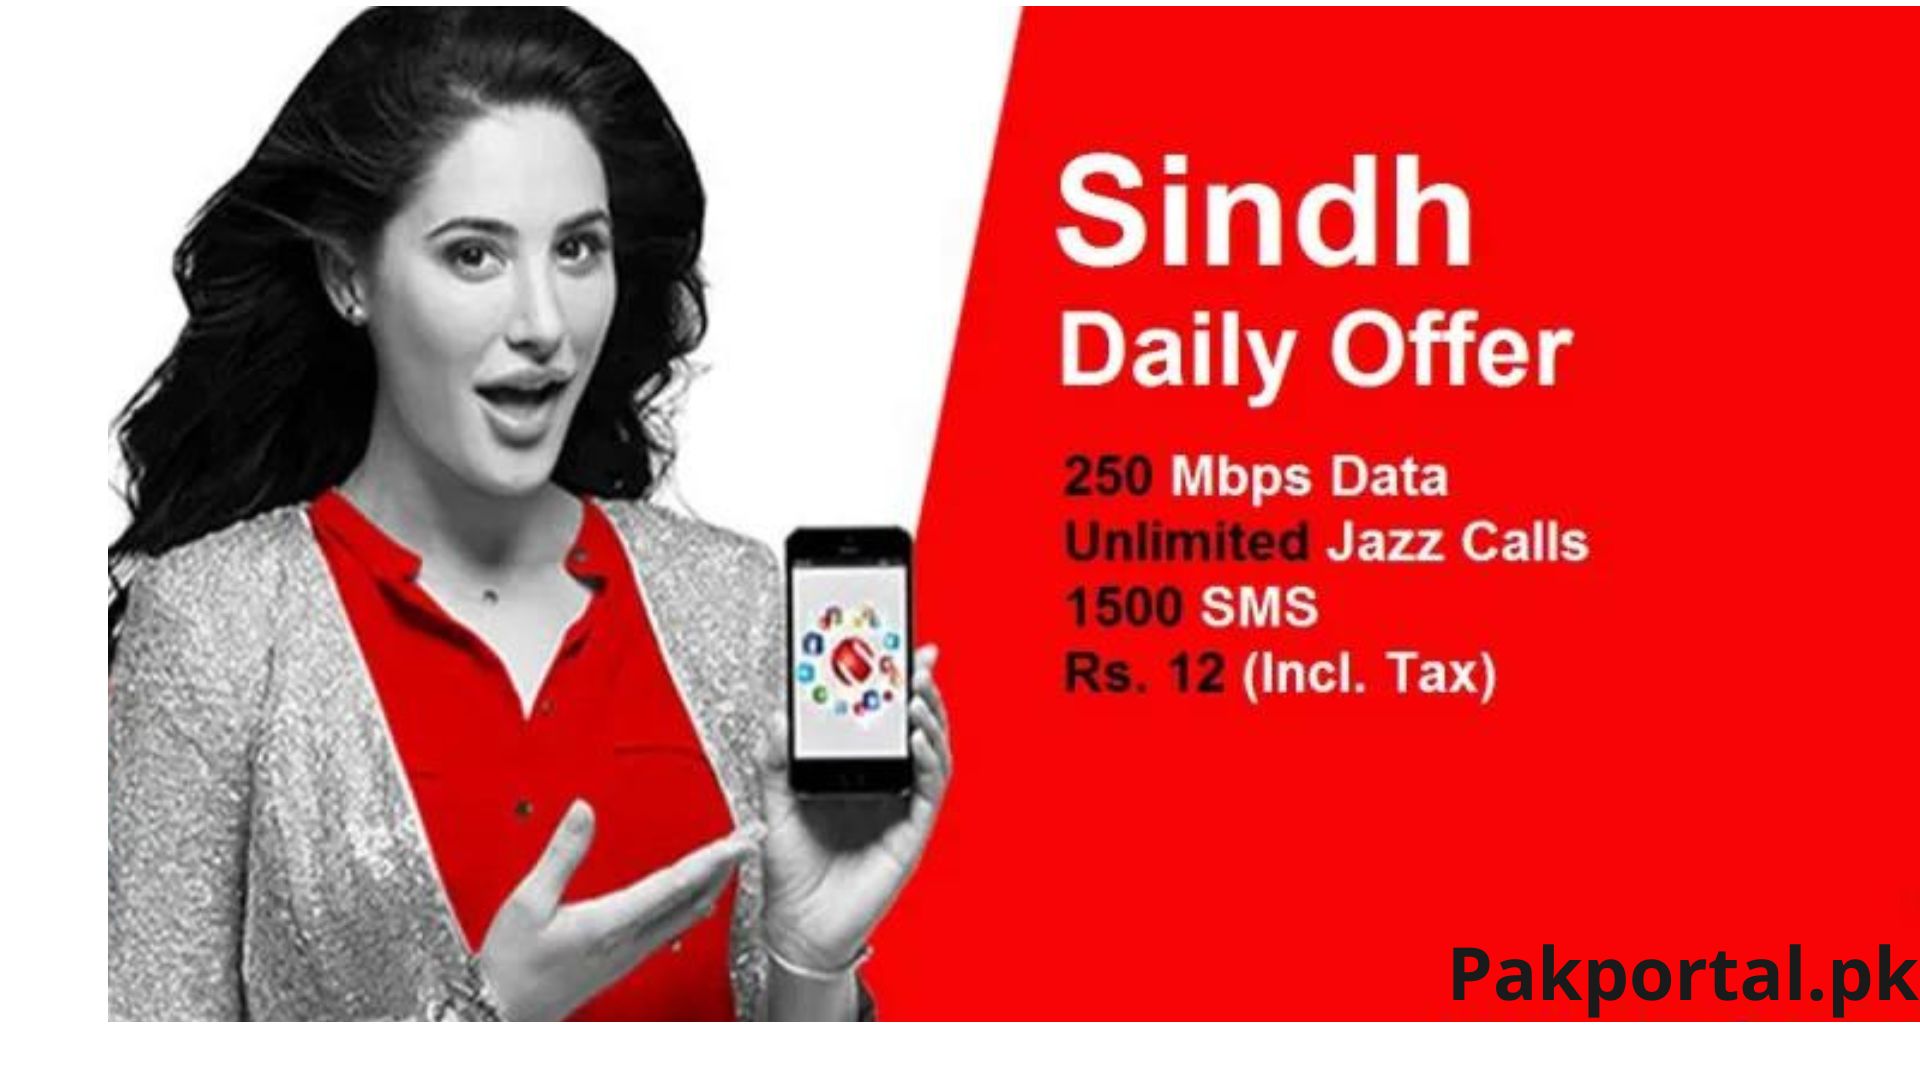 Sindh Daily Offer